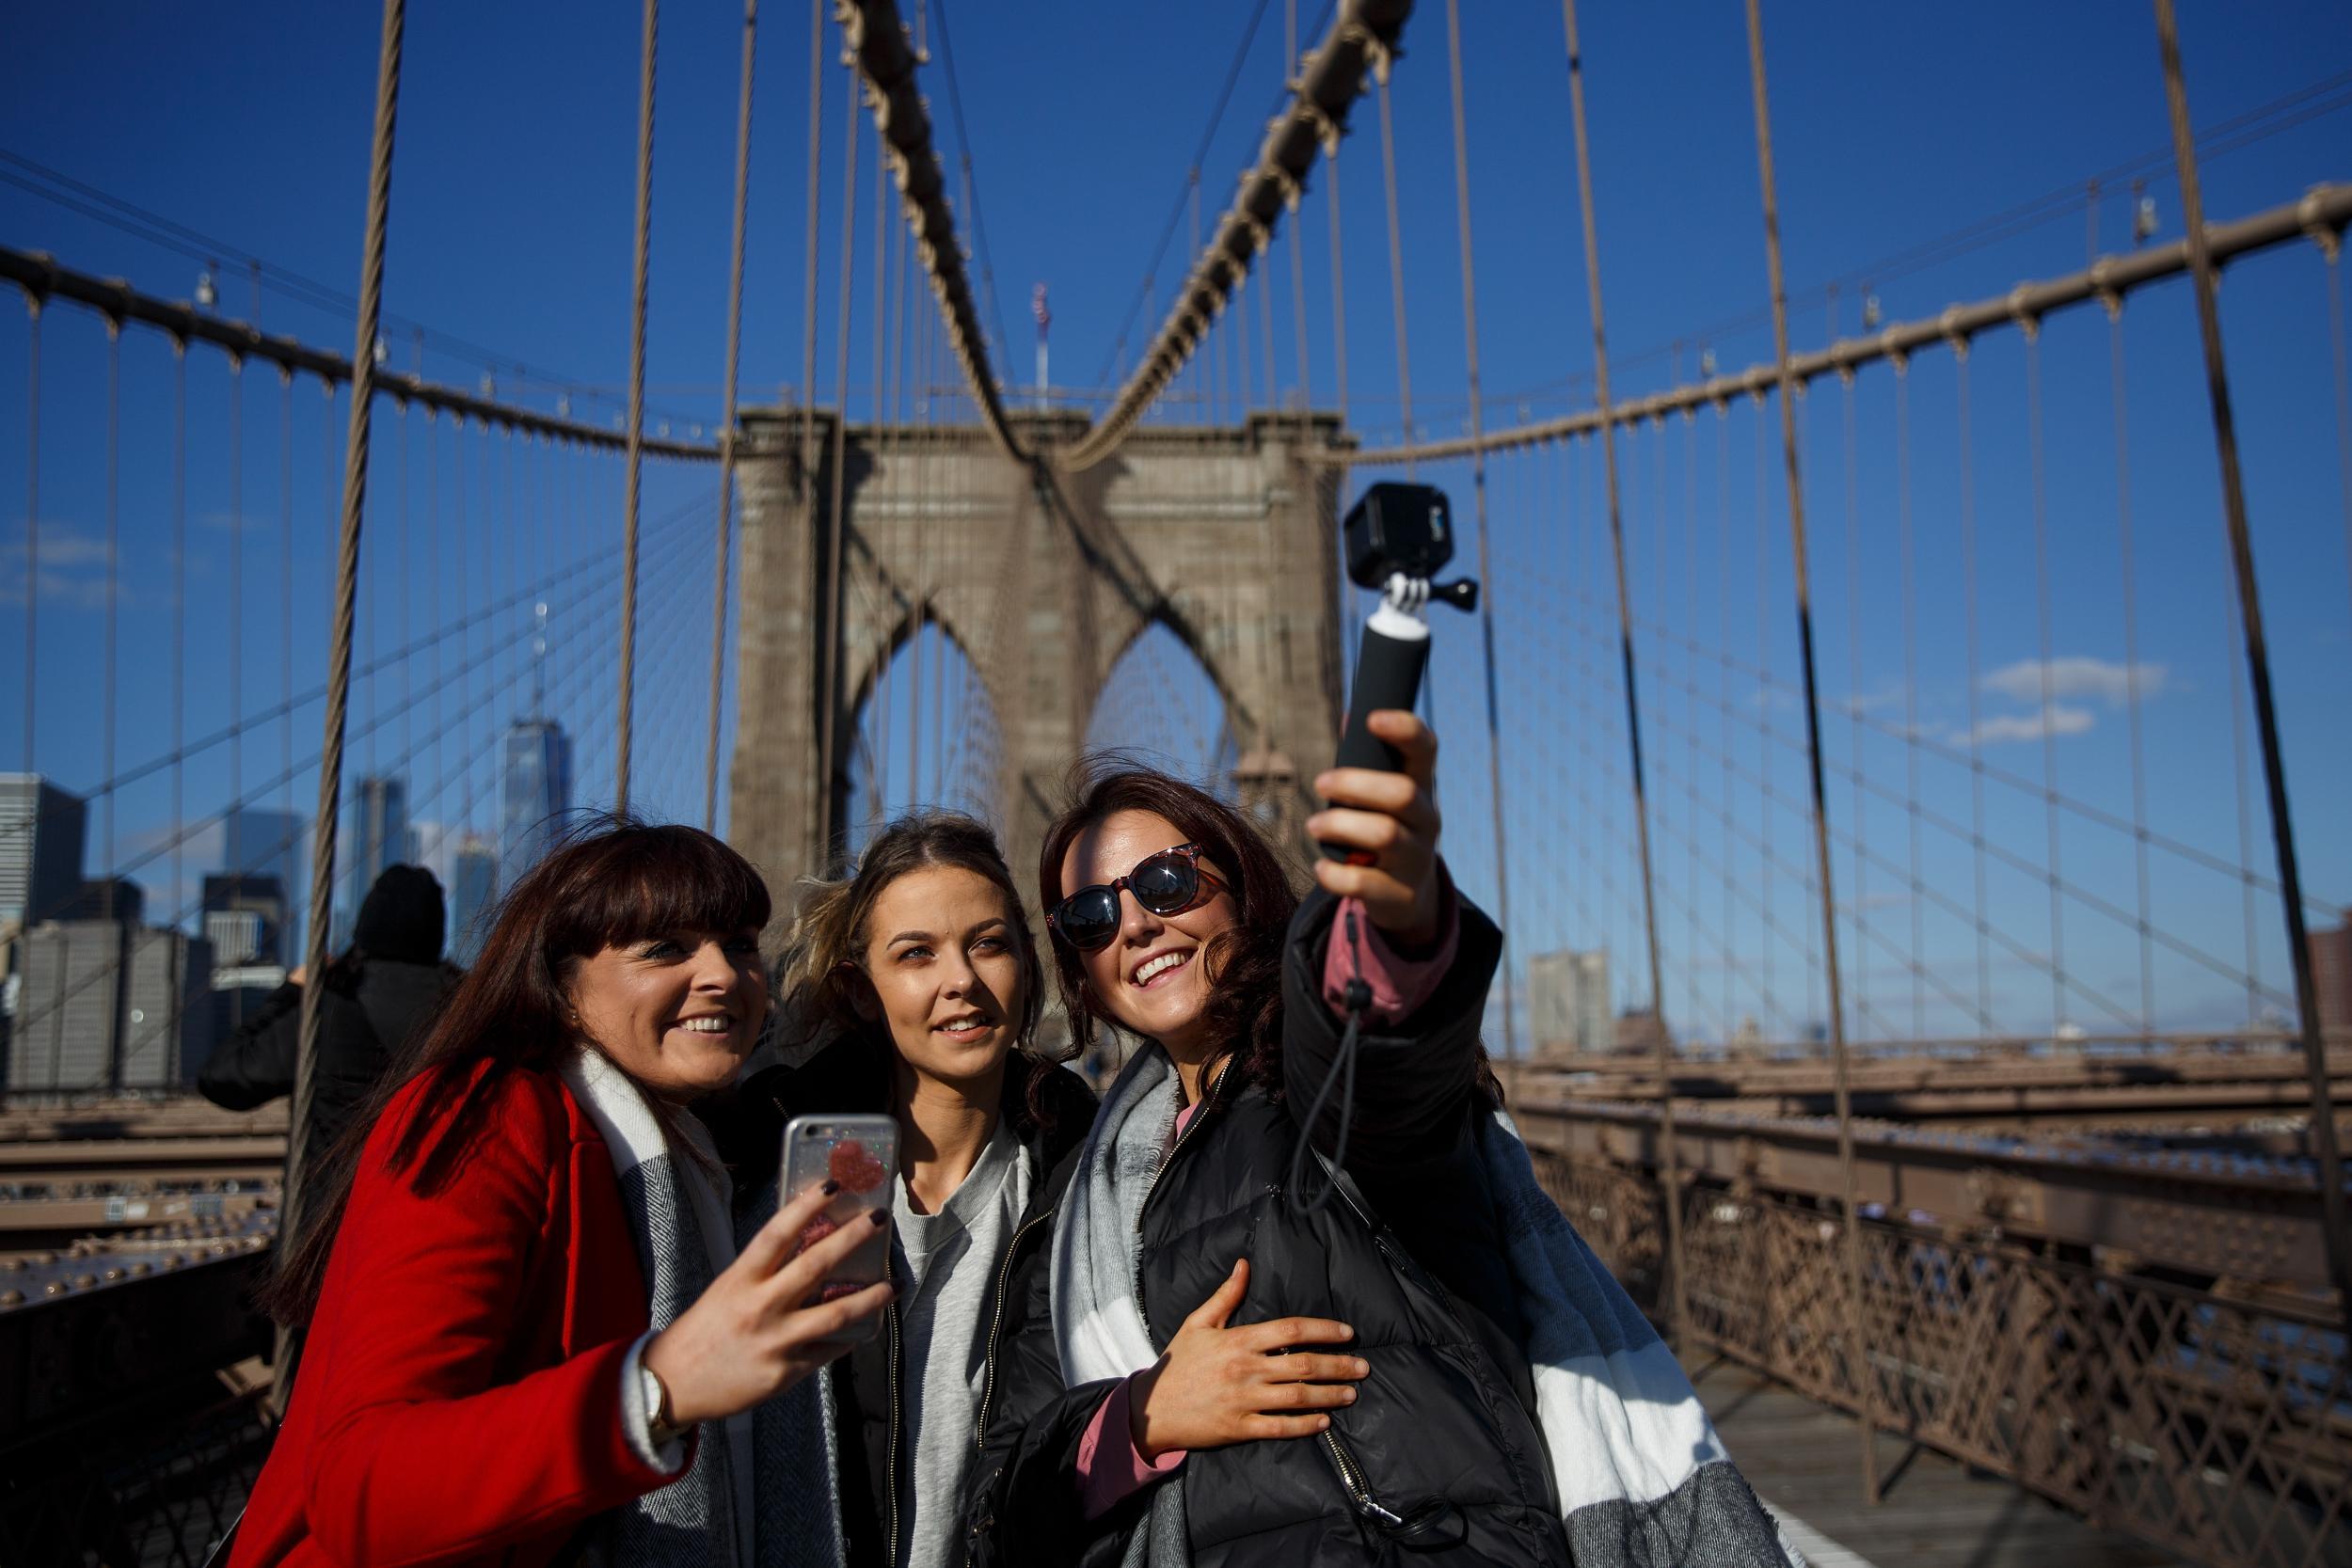 A group of friends takes a photograph on the Brooklyn Bridge